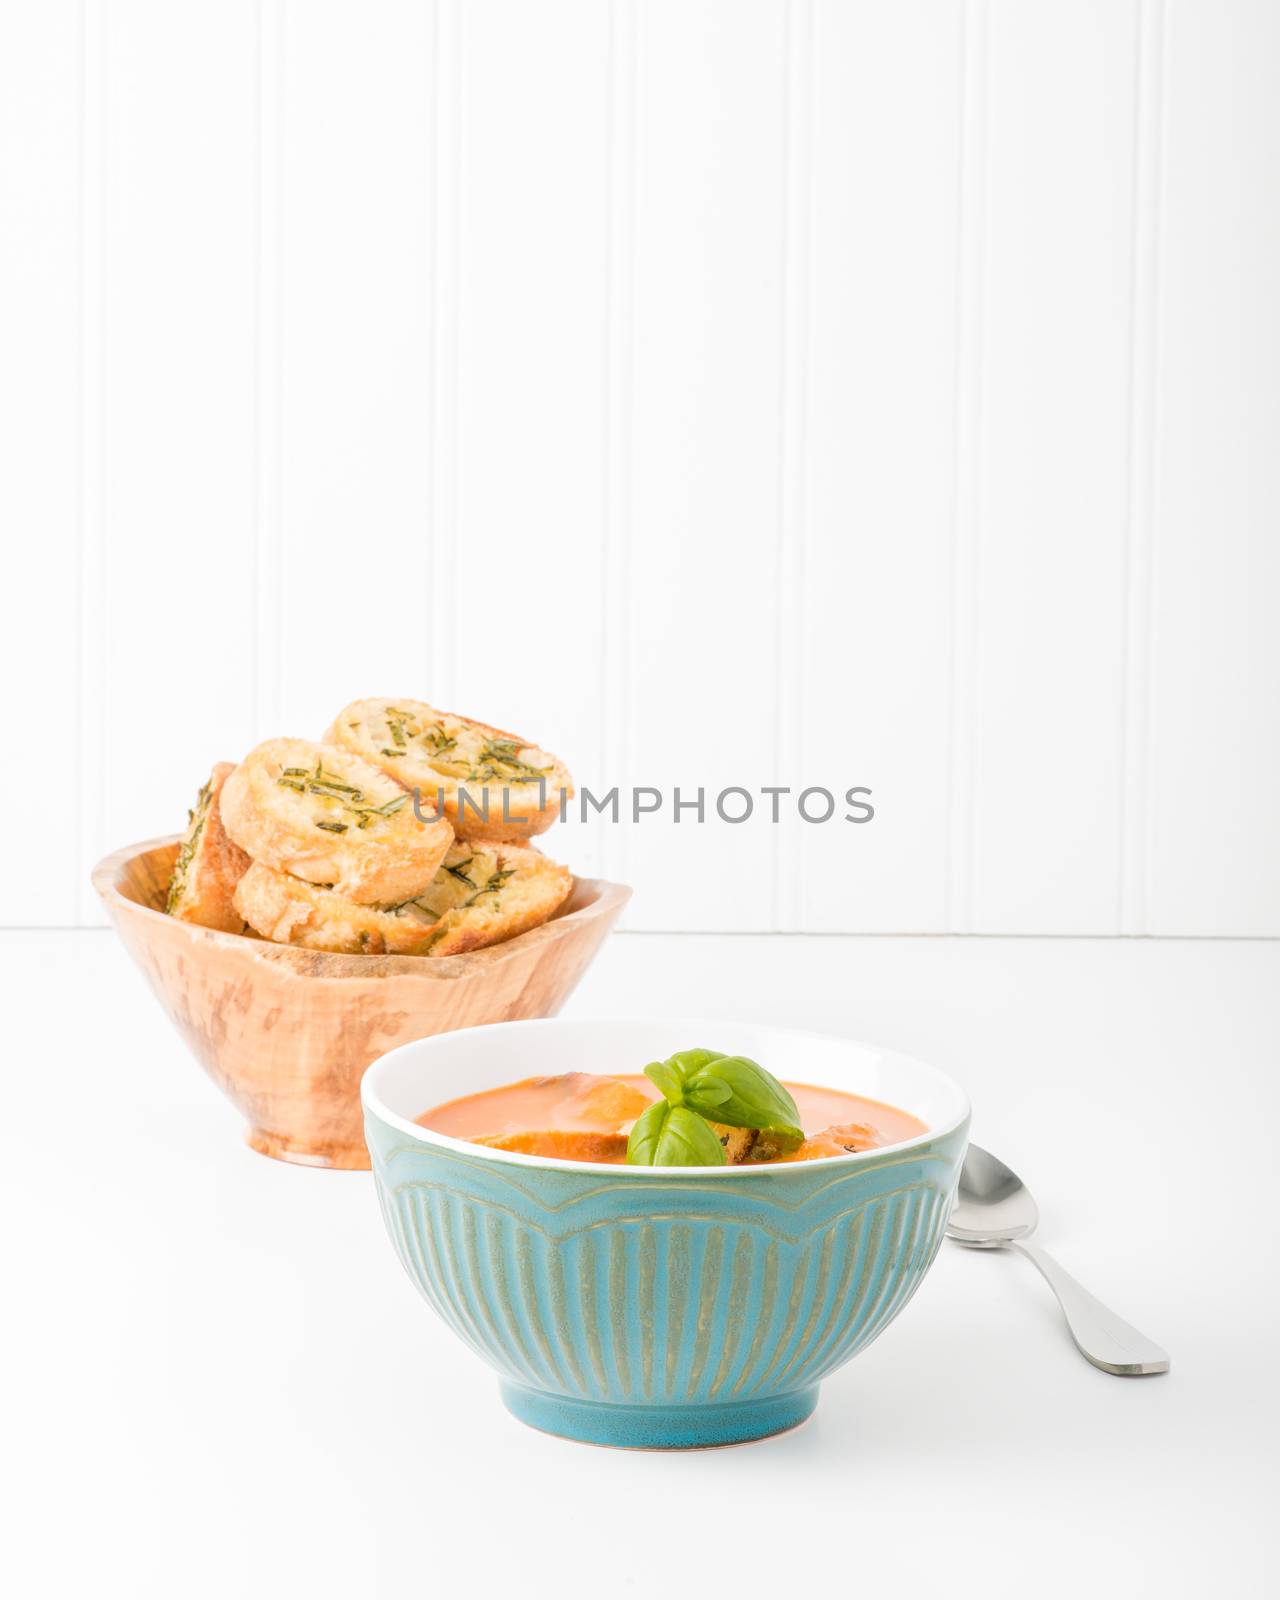 Creamy tomato basil soup with crostini.  Useful for many food service marketing applications.